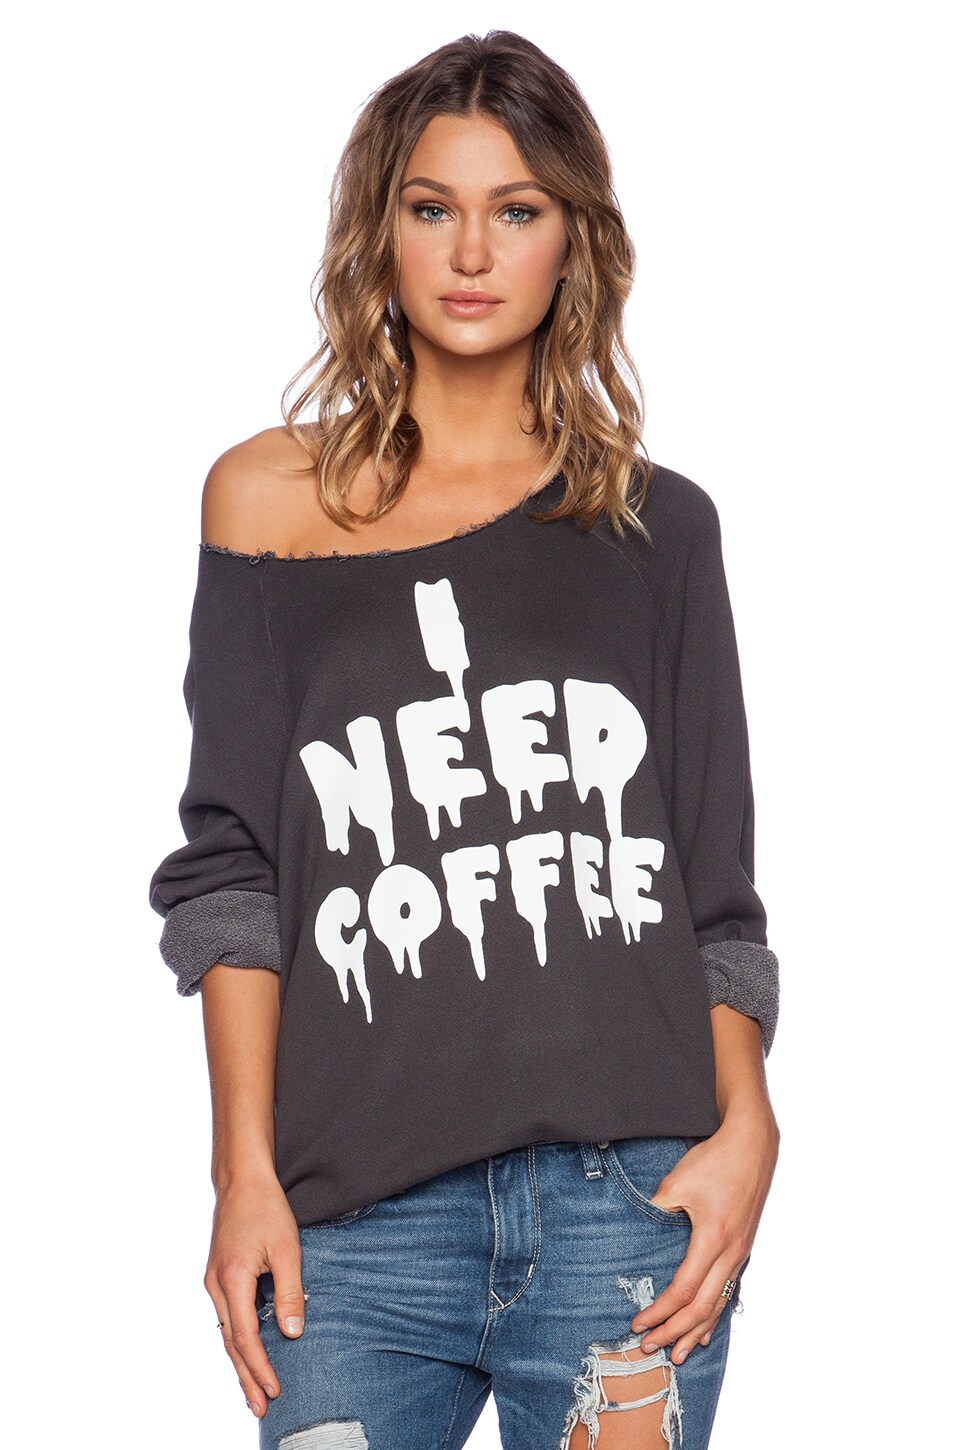 coffee pullover